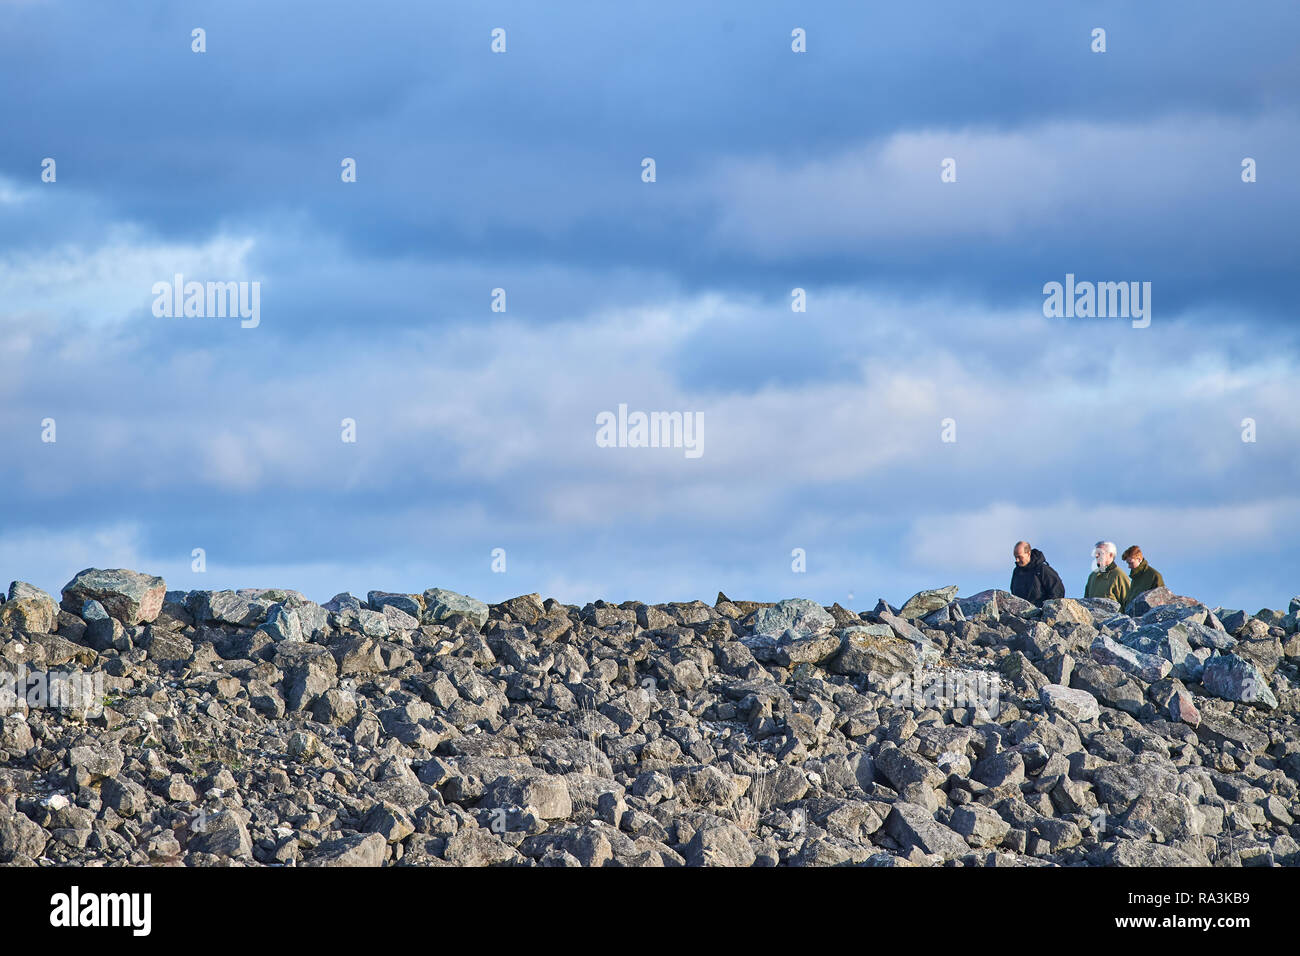 Three people walk along the path behind the rock pile of the dam wall at Rutland Water reservoir in the Midlands of England on a cloudy winter day. Stock Photo